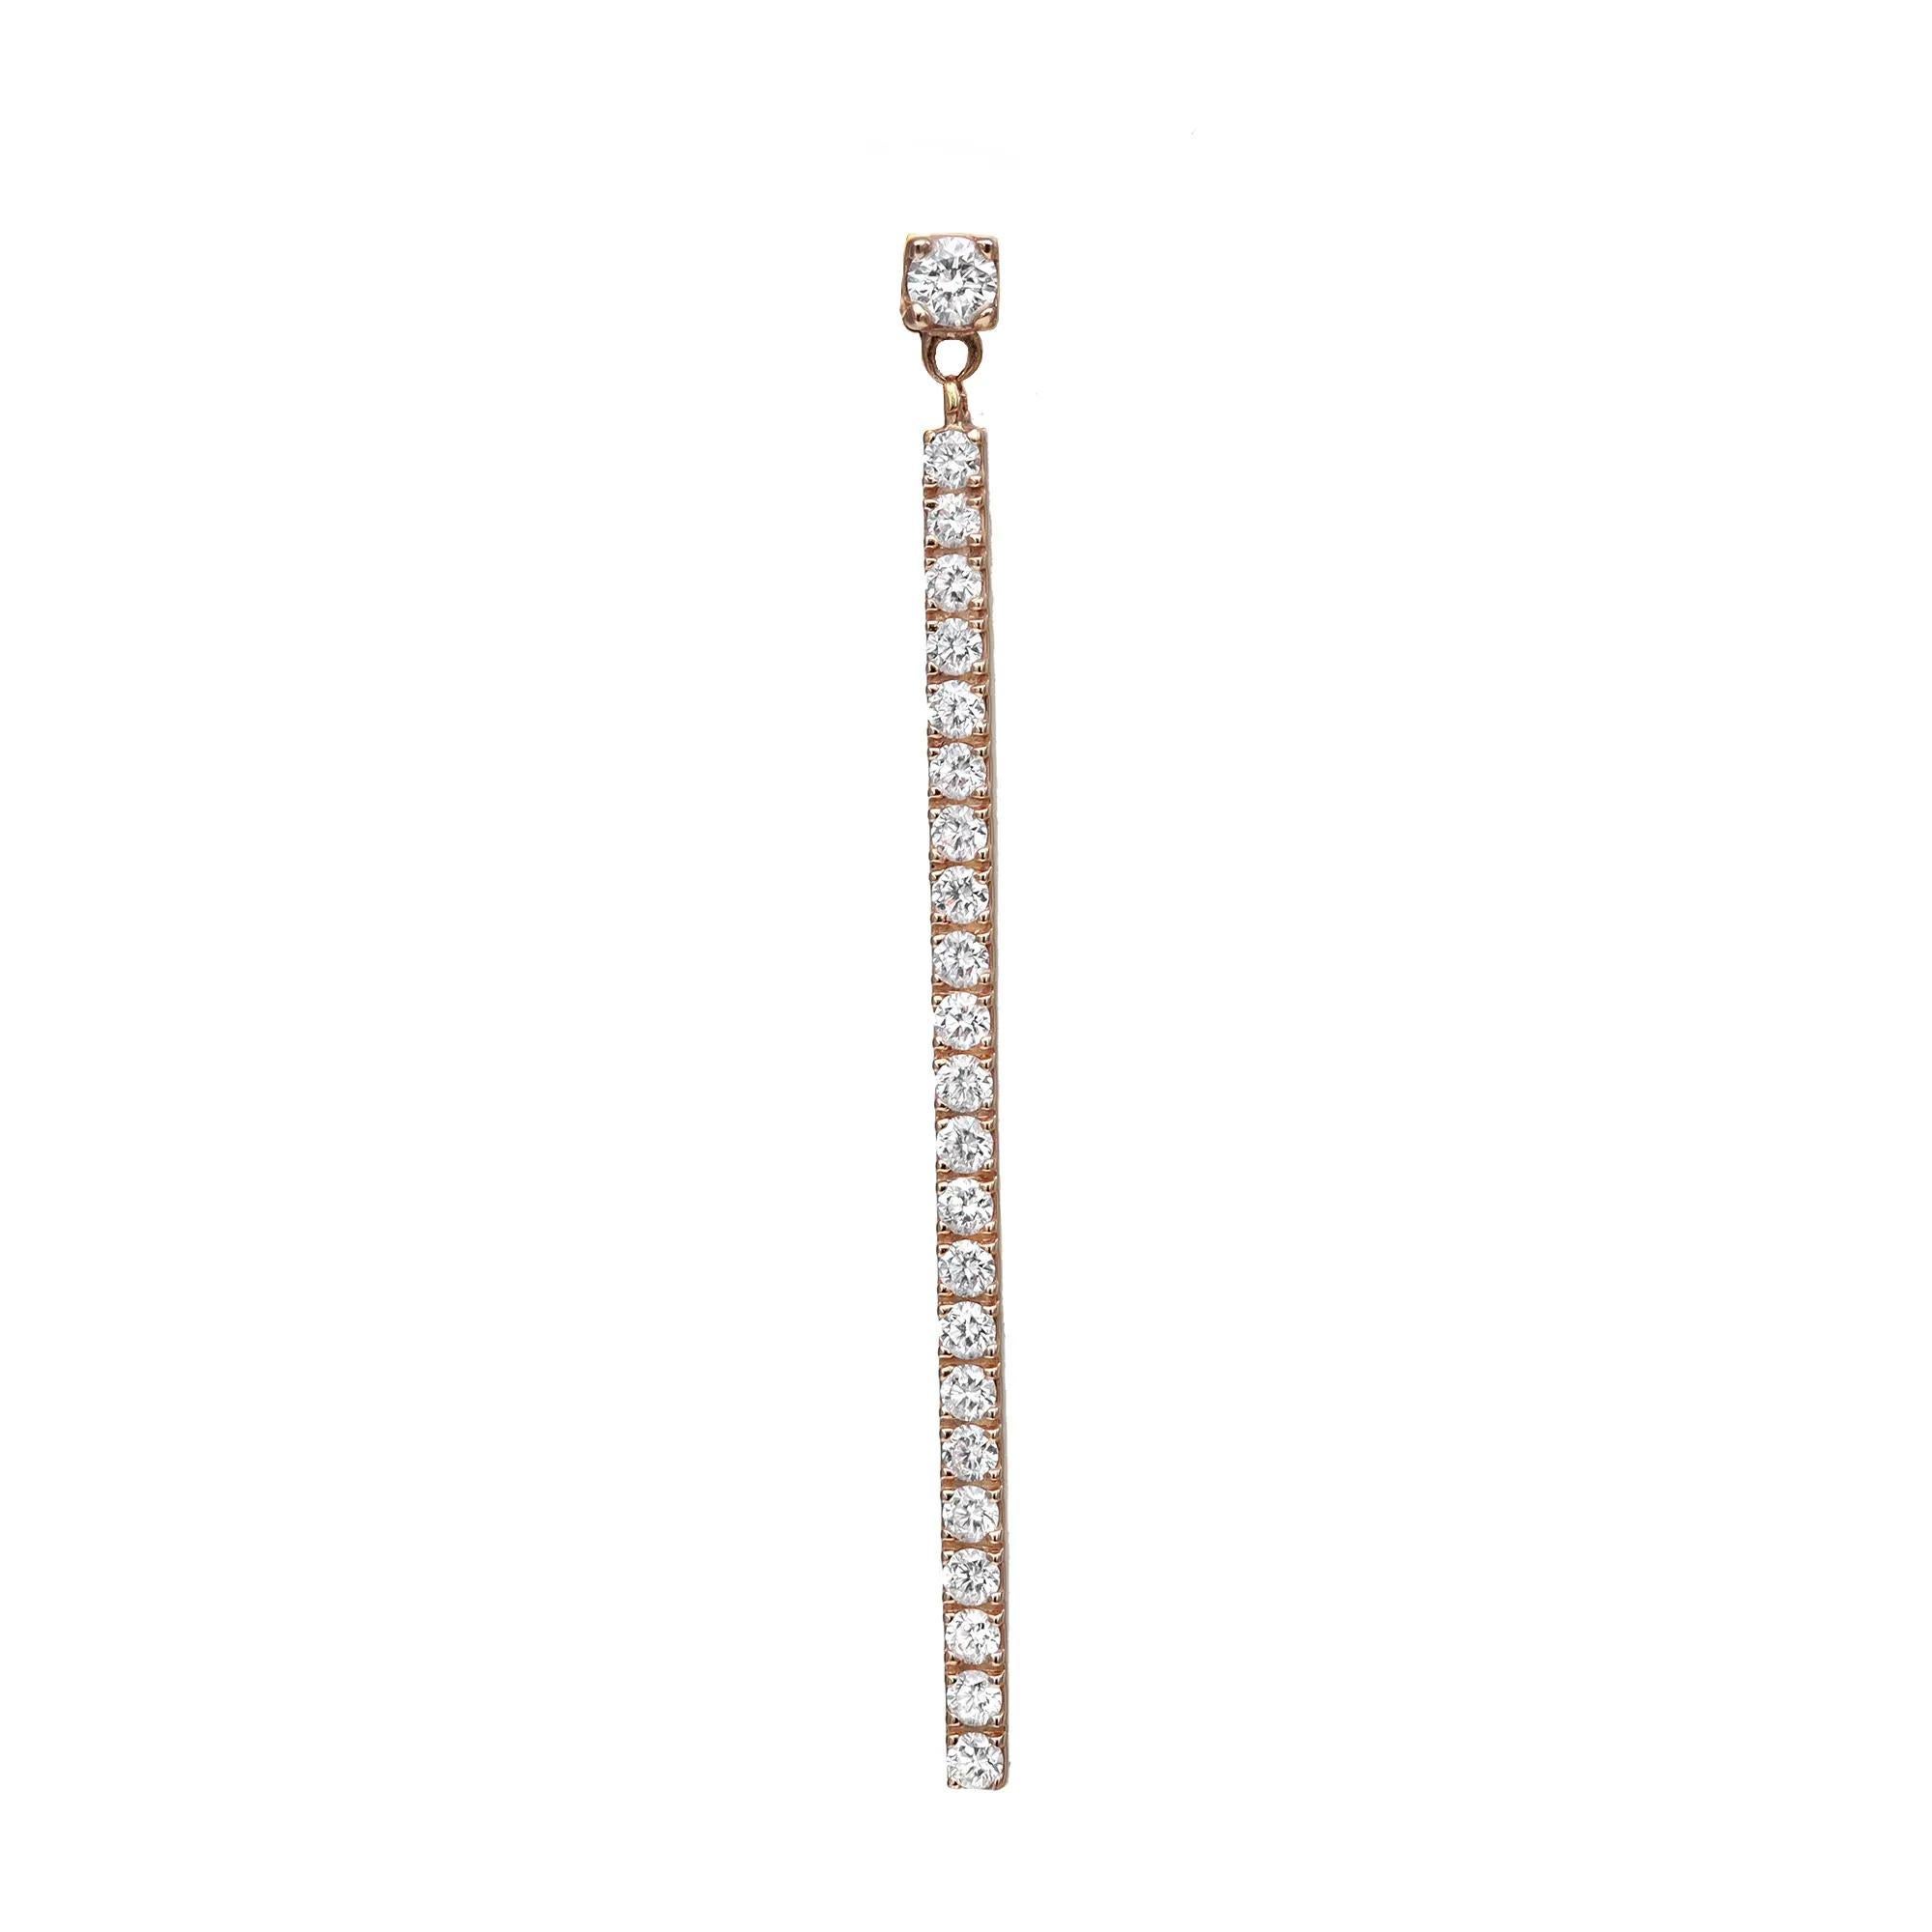 Shimmering round diamonds sway along these Messika Barrette Gatsby diamond long drop earrings. Crafted in 18K yellow gold. Features a single row of pave set round brilliant cut diamonds with a prong set round diamond on the top. Secured with push